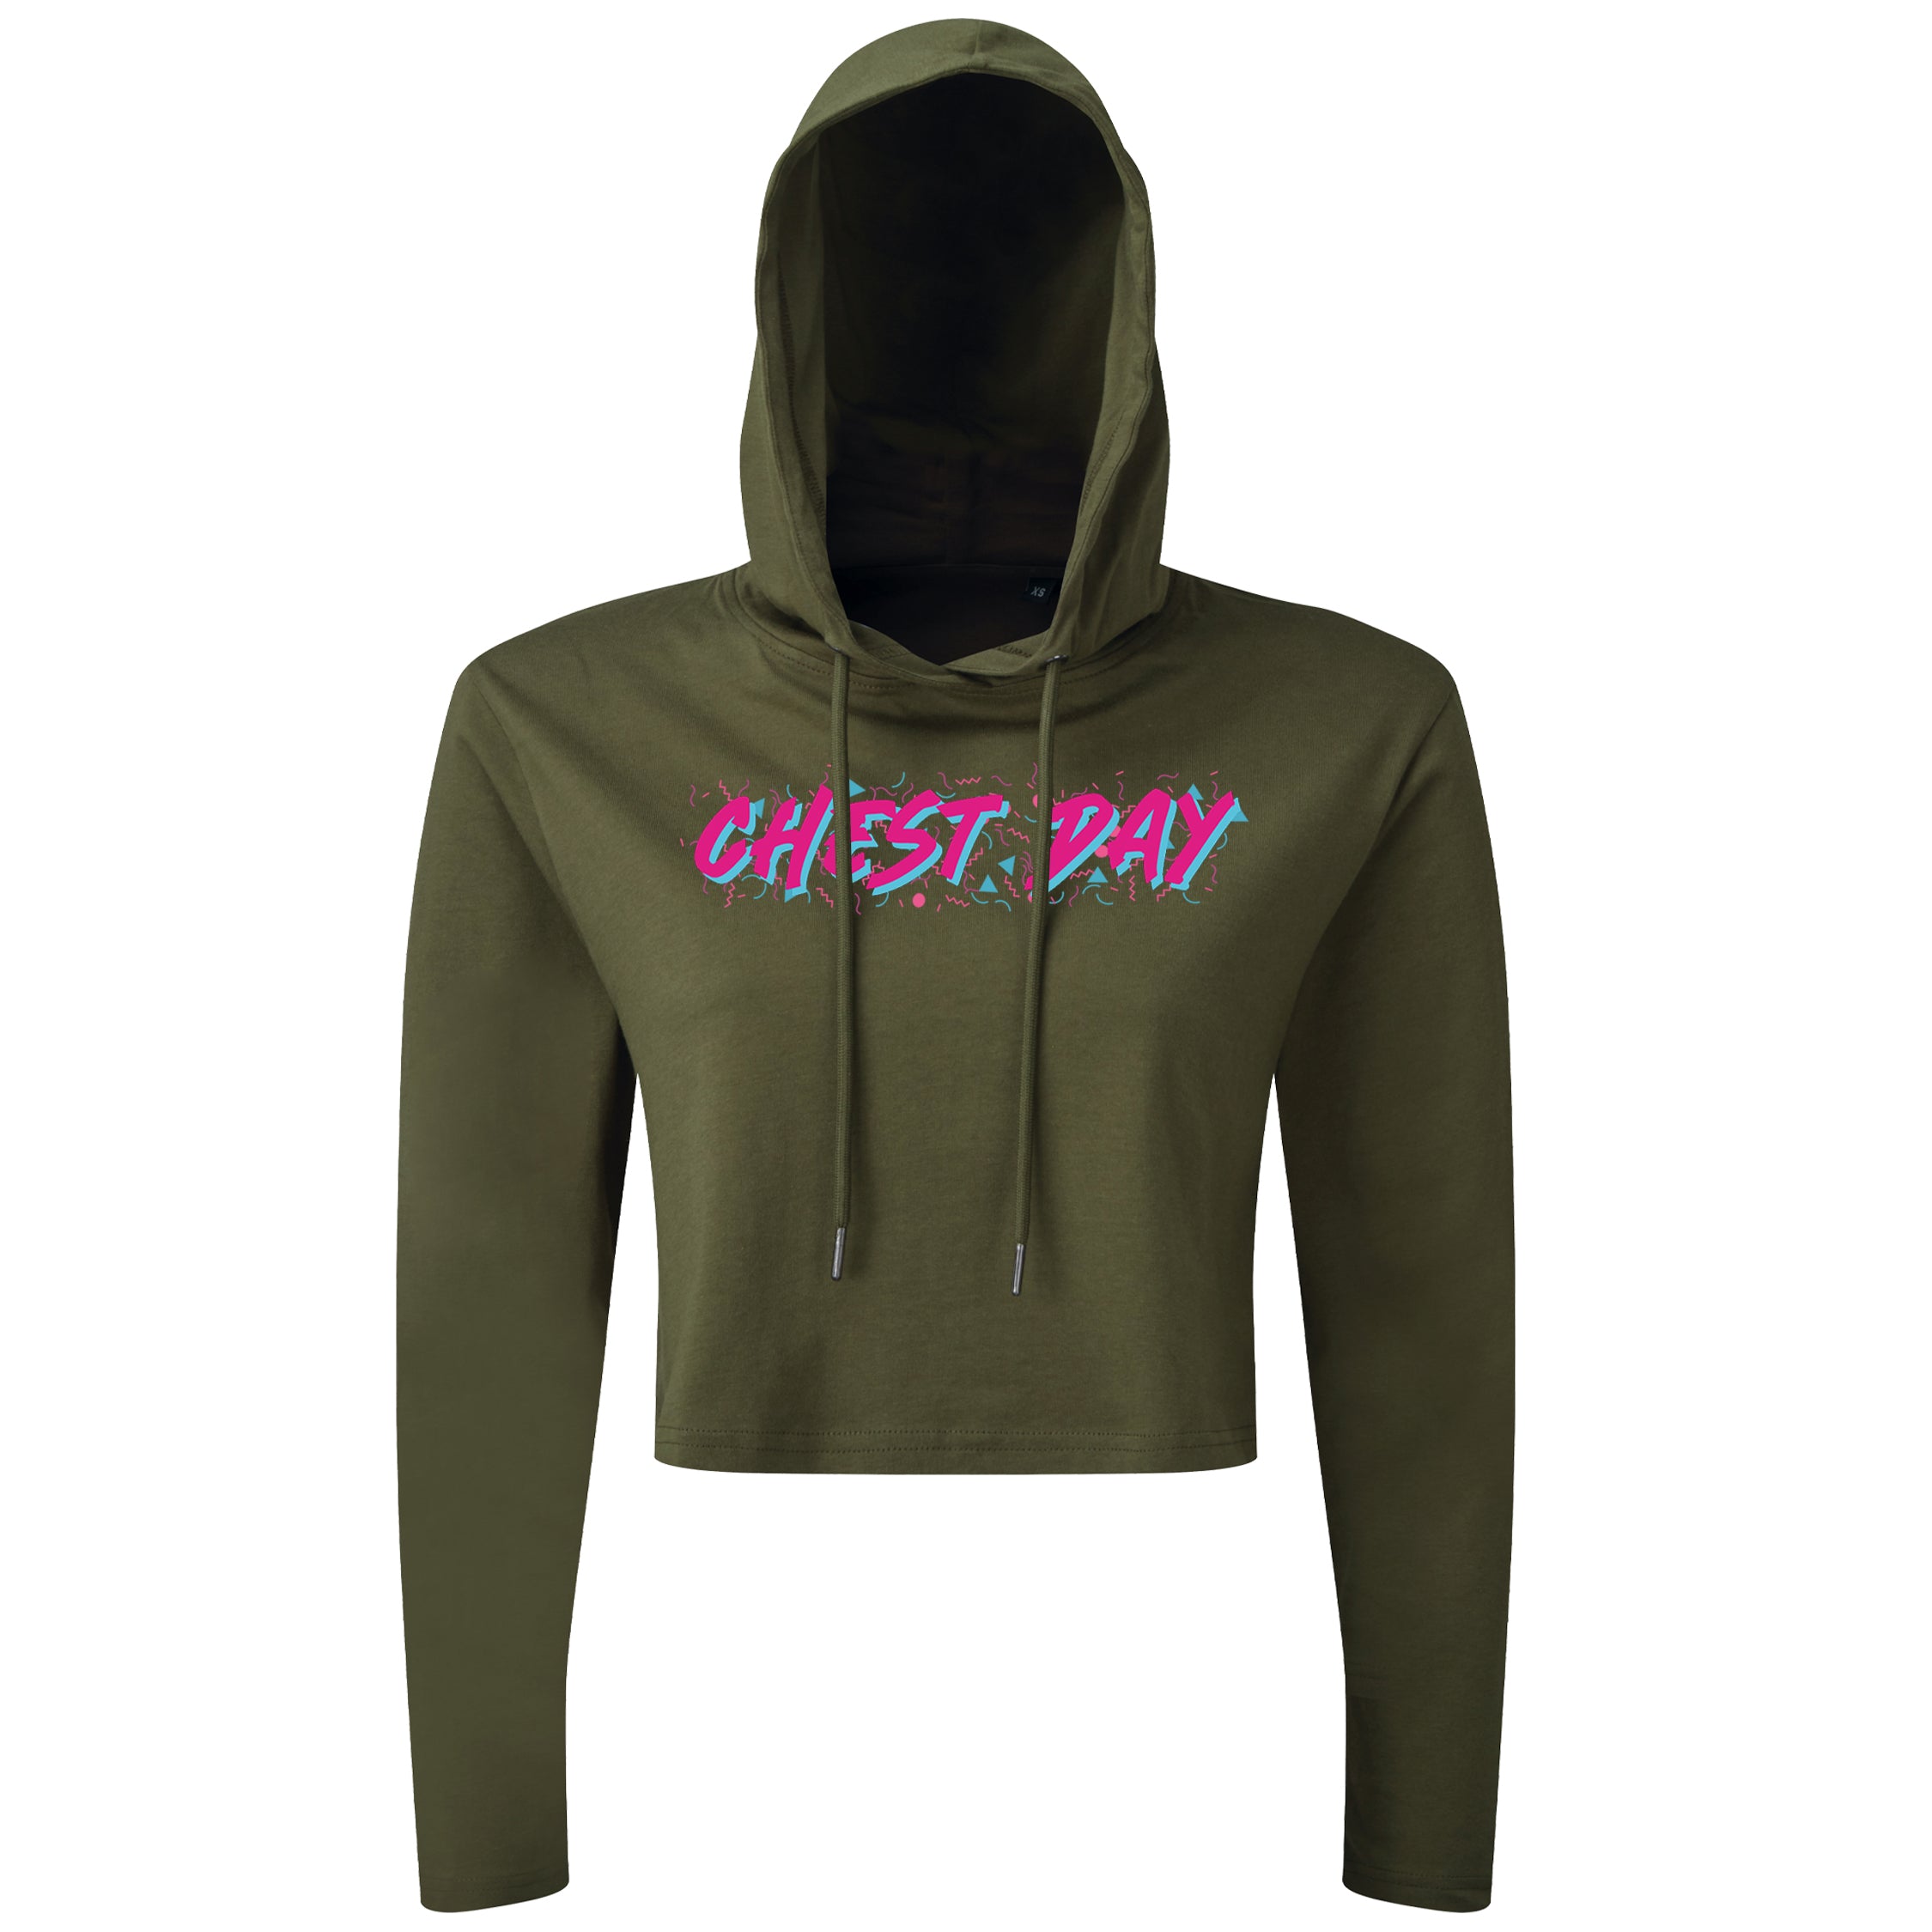 Retro Chest Day - Cropped Hoodie